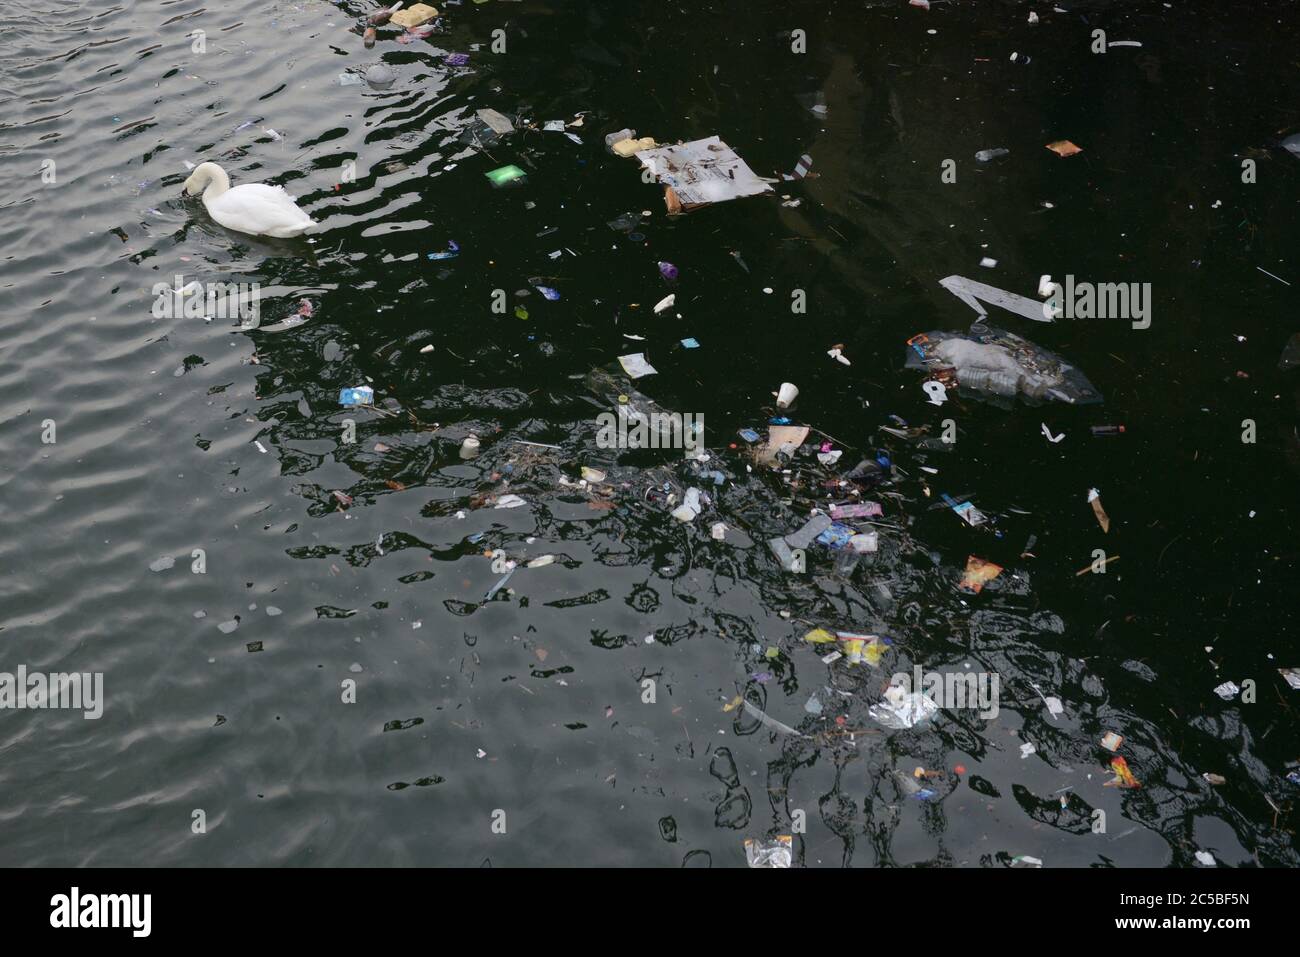 Swan looks down into murky water as swims away from a dense floating patch of litter and rubbish. Further, a dead pigeon floats too at the top. Stock Photo